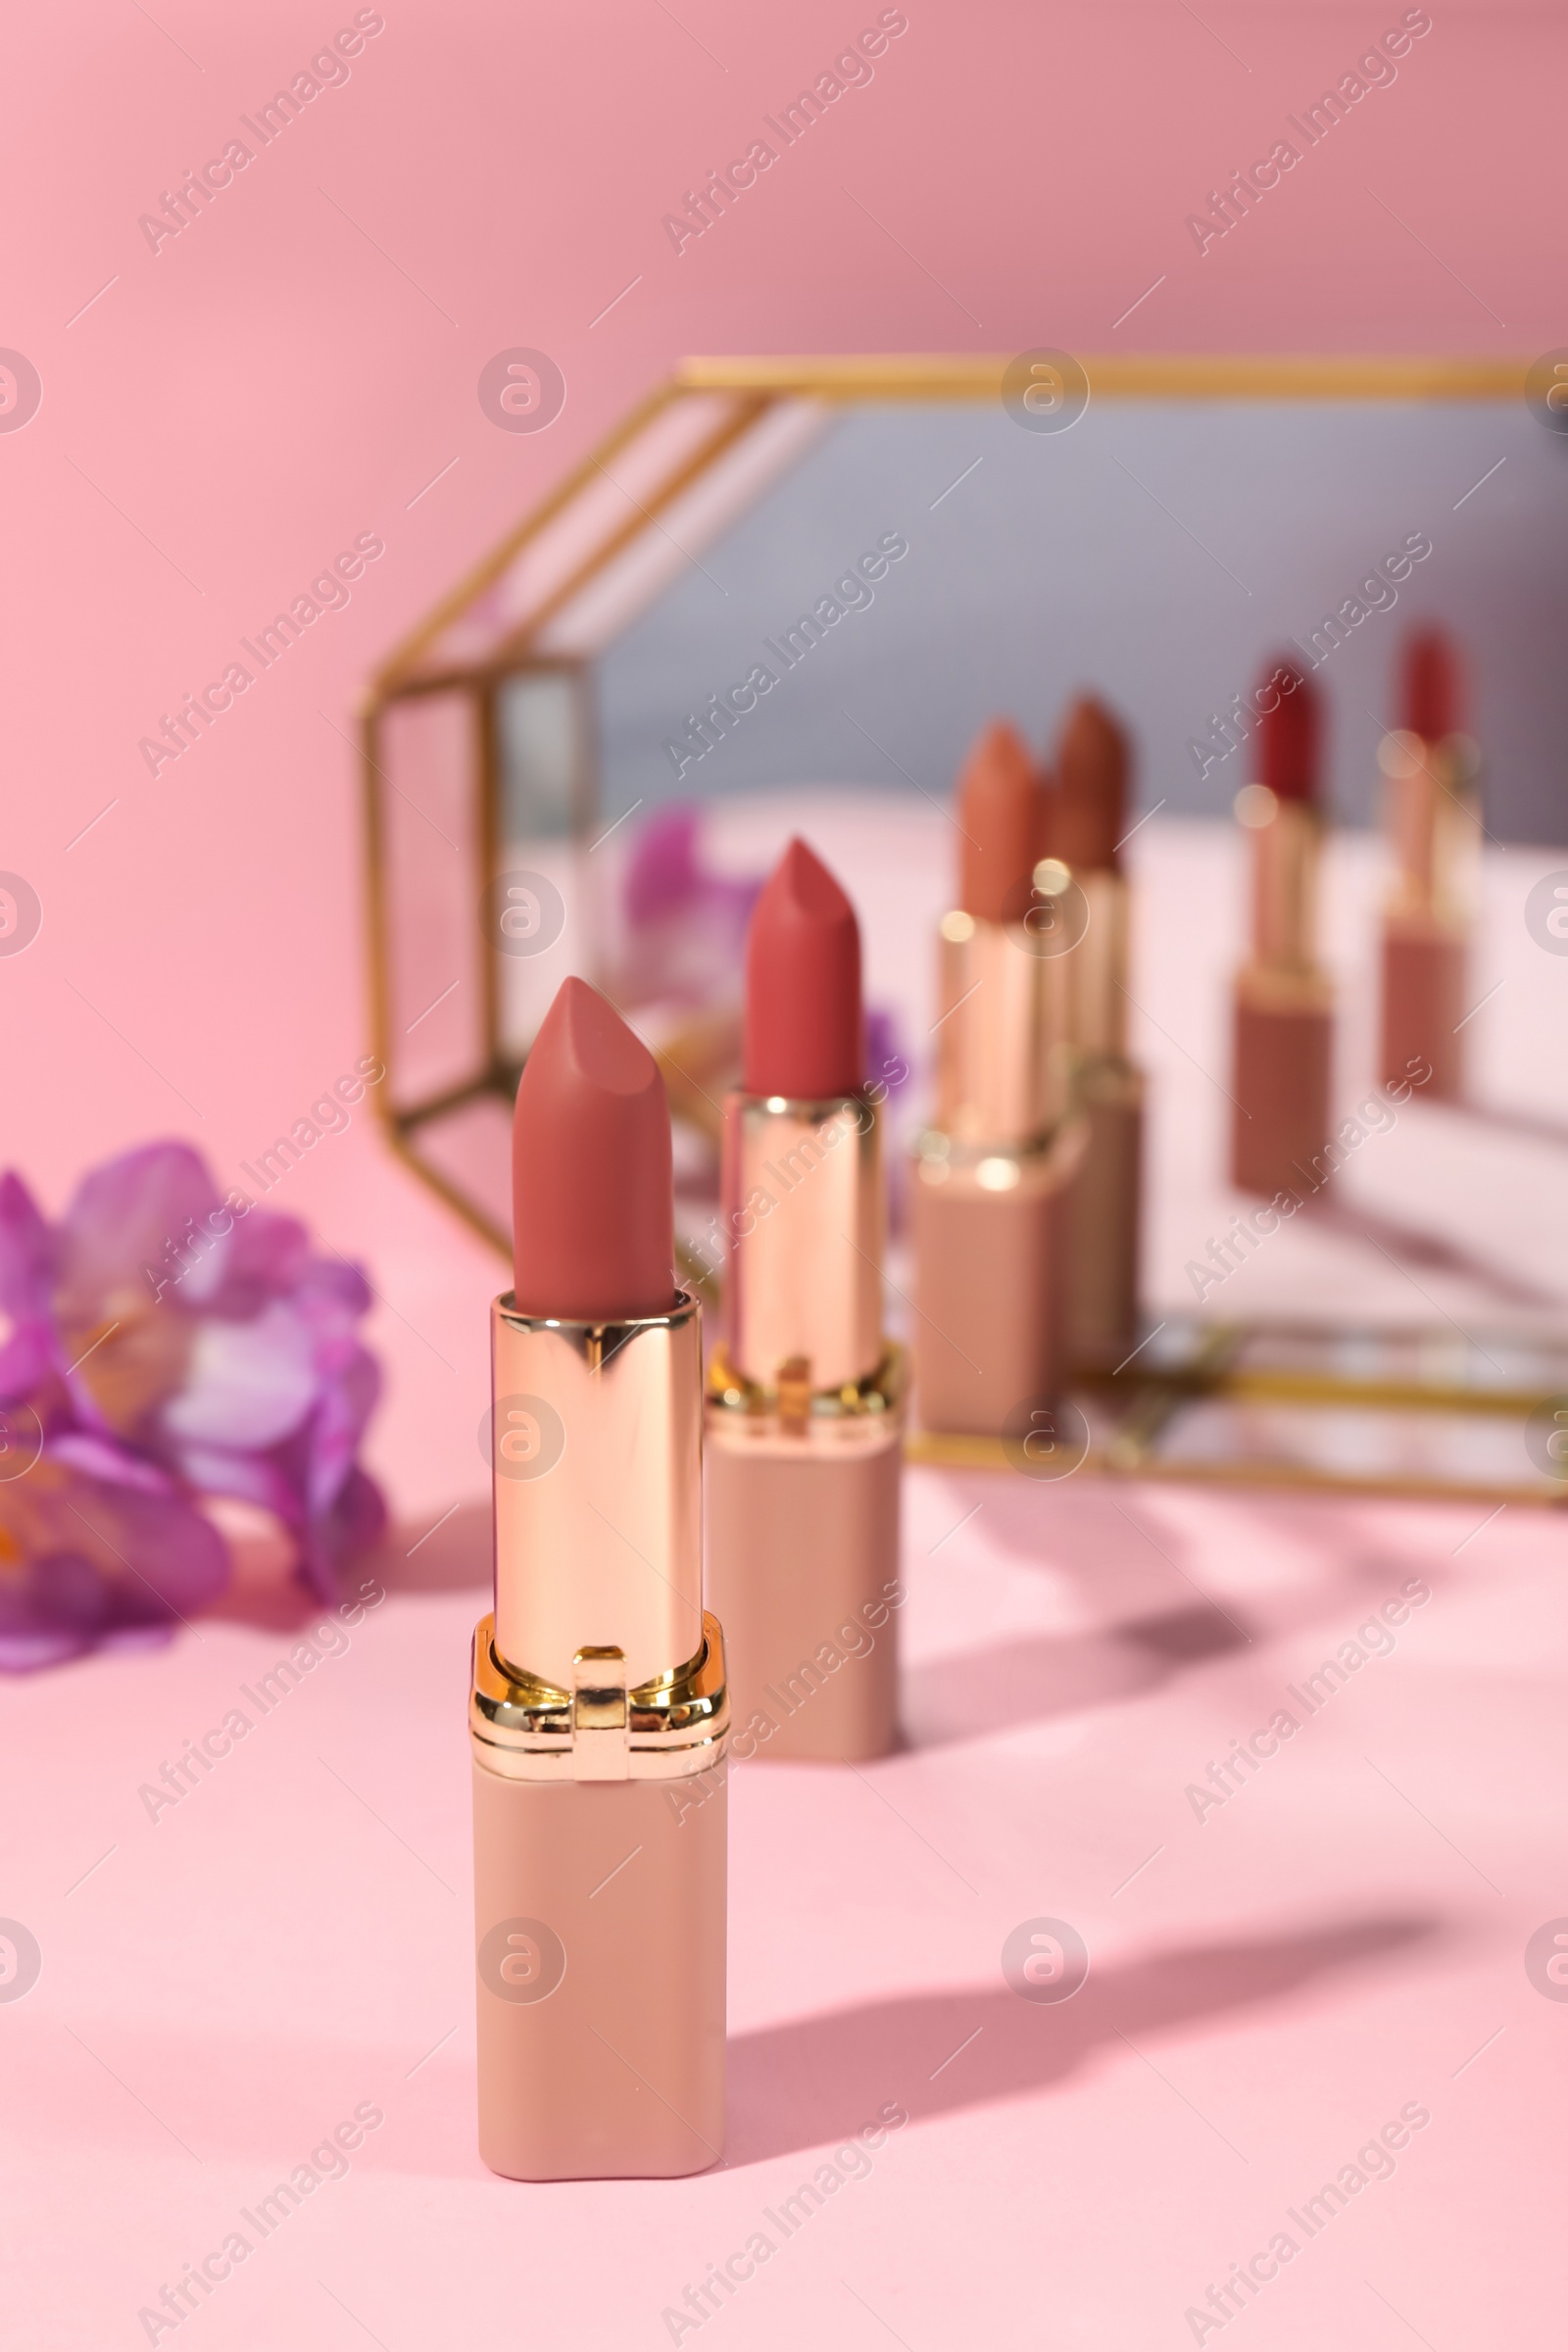 Photo of Different lipsticks and flower near mirror on pink background